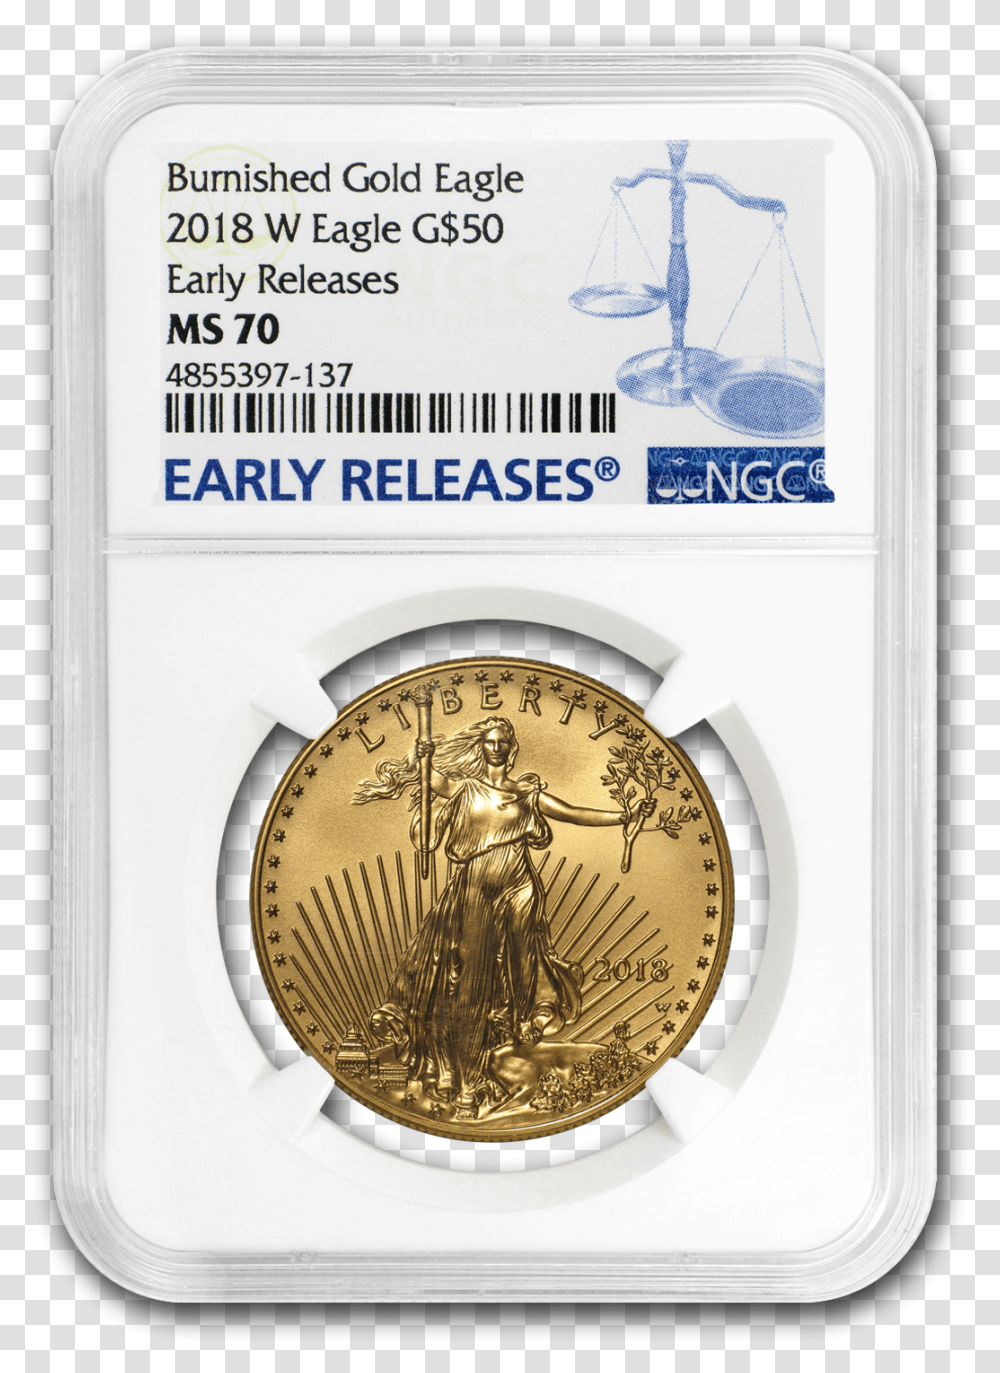 Buy 2018 W 1 Oz Burnished Gold Eagle Ms 70 Ngc Coin, Clock Tower, Architecture, Building, Money Transparent Png